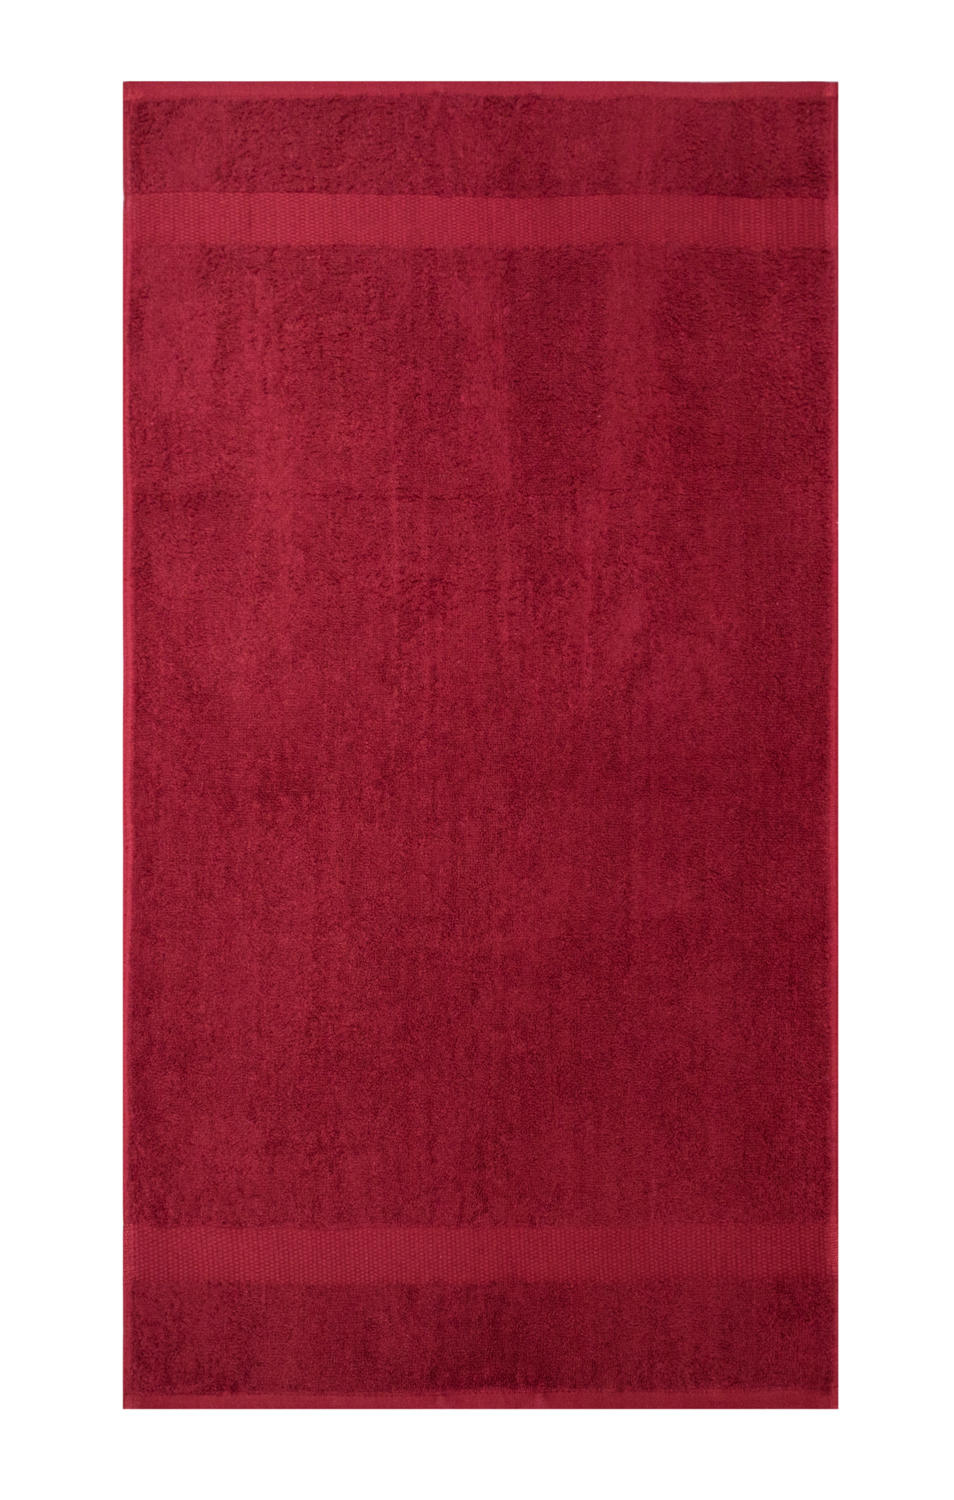  Tiber Hand Towel 50x100 cm in Farbe Rich Red